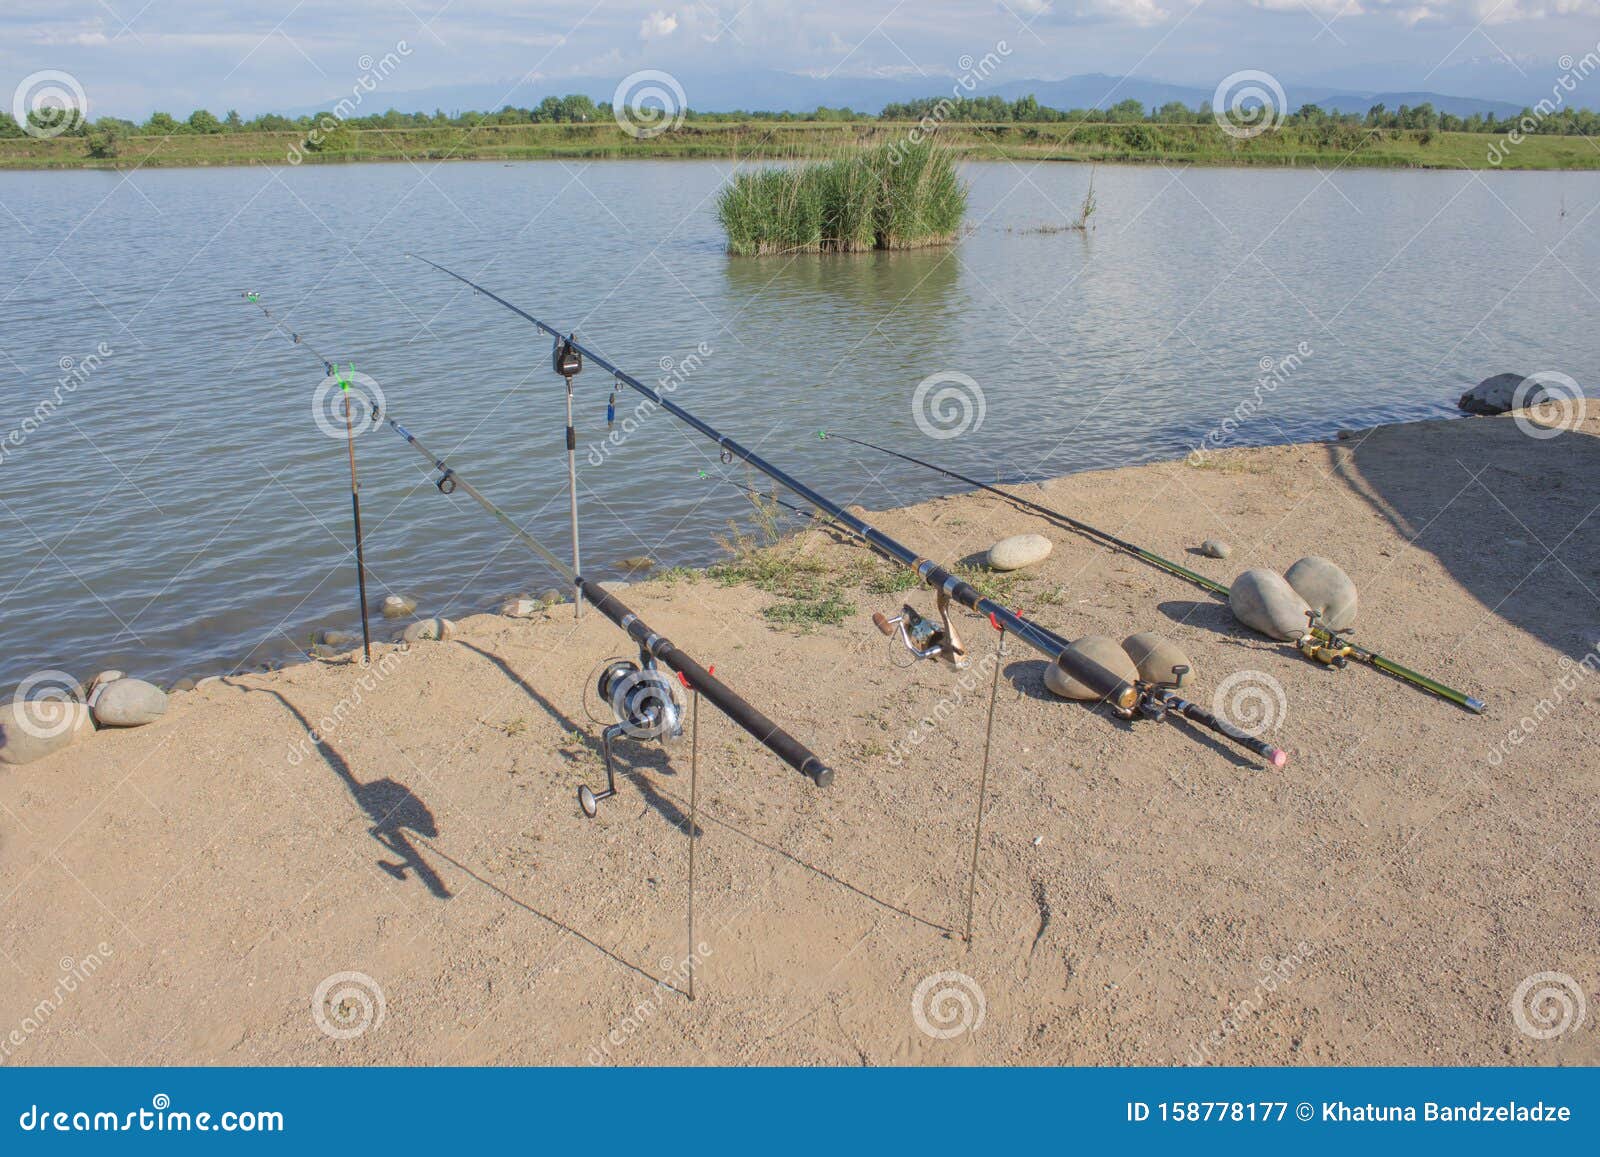 Freshwater Angling with Rods beside a Lake. Fishing Rod on a Prop